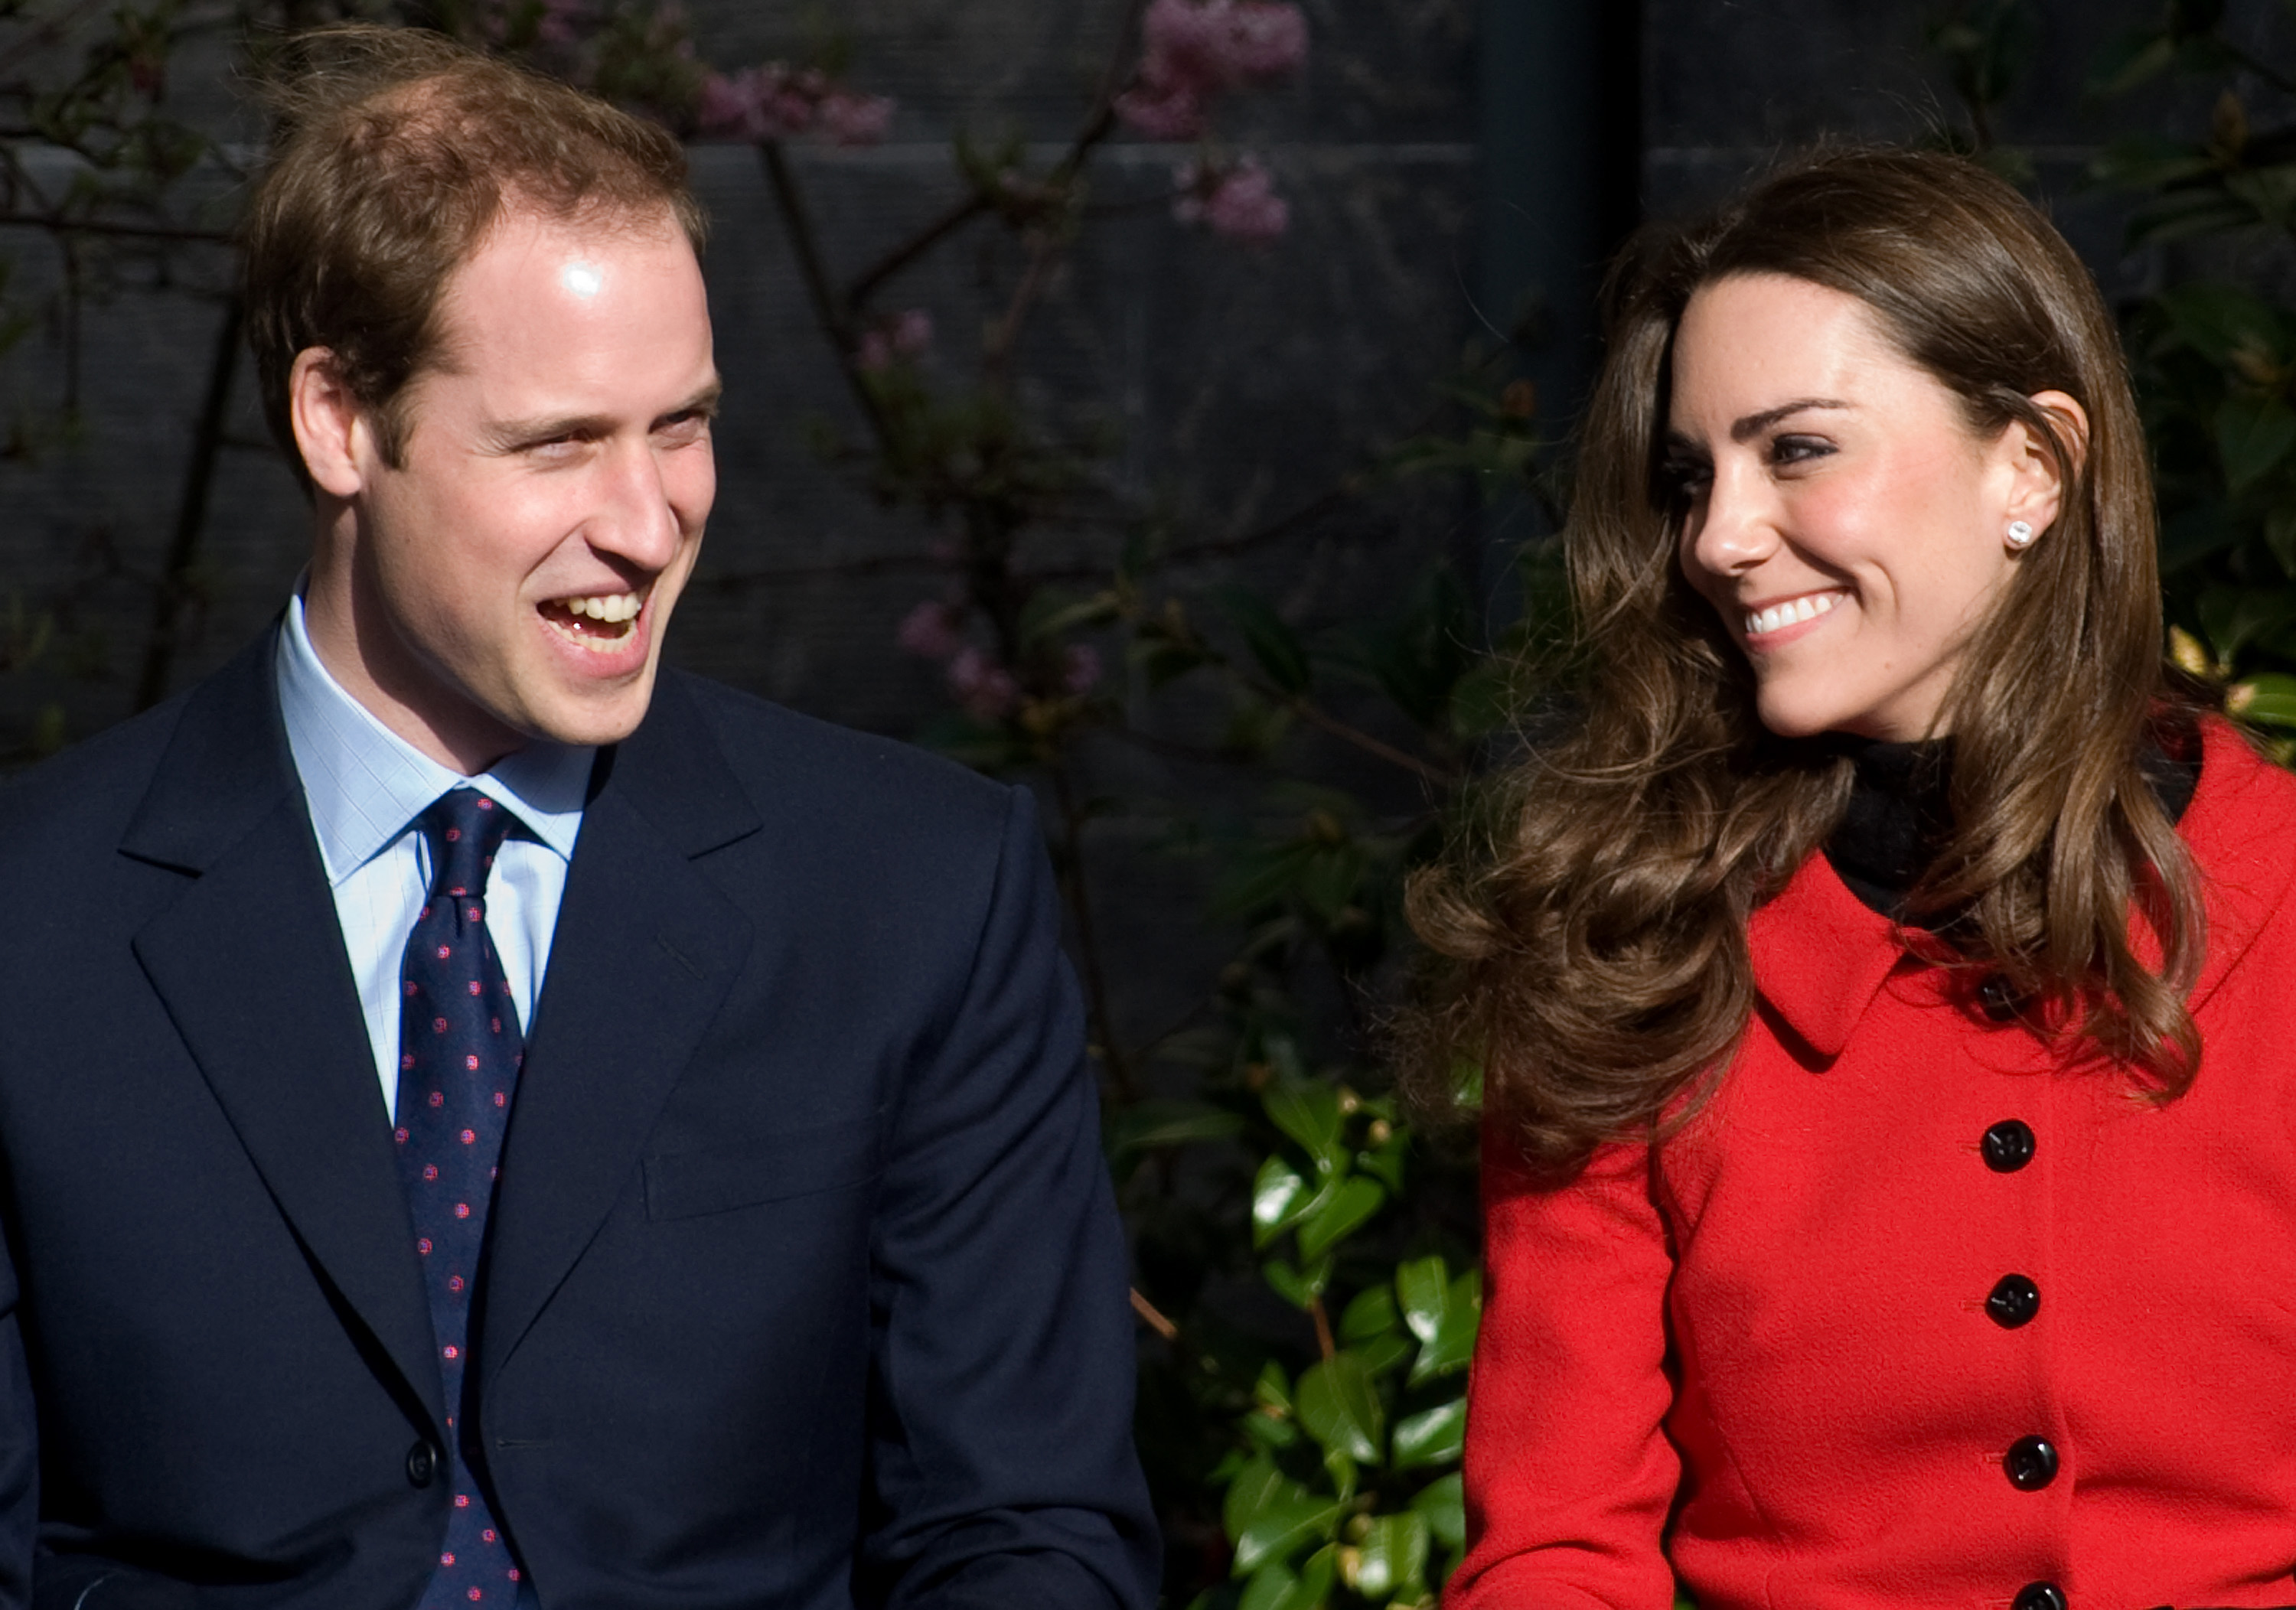 Prince William and Kate Middleton visit their alma mater University of St. Andrews in 2011